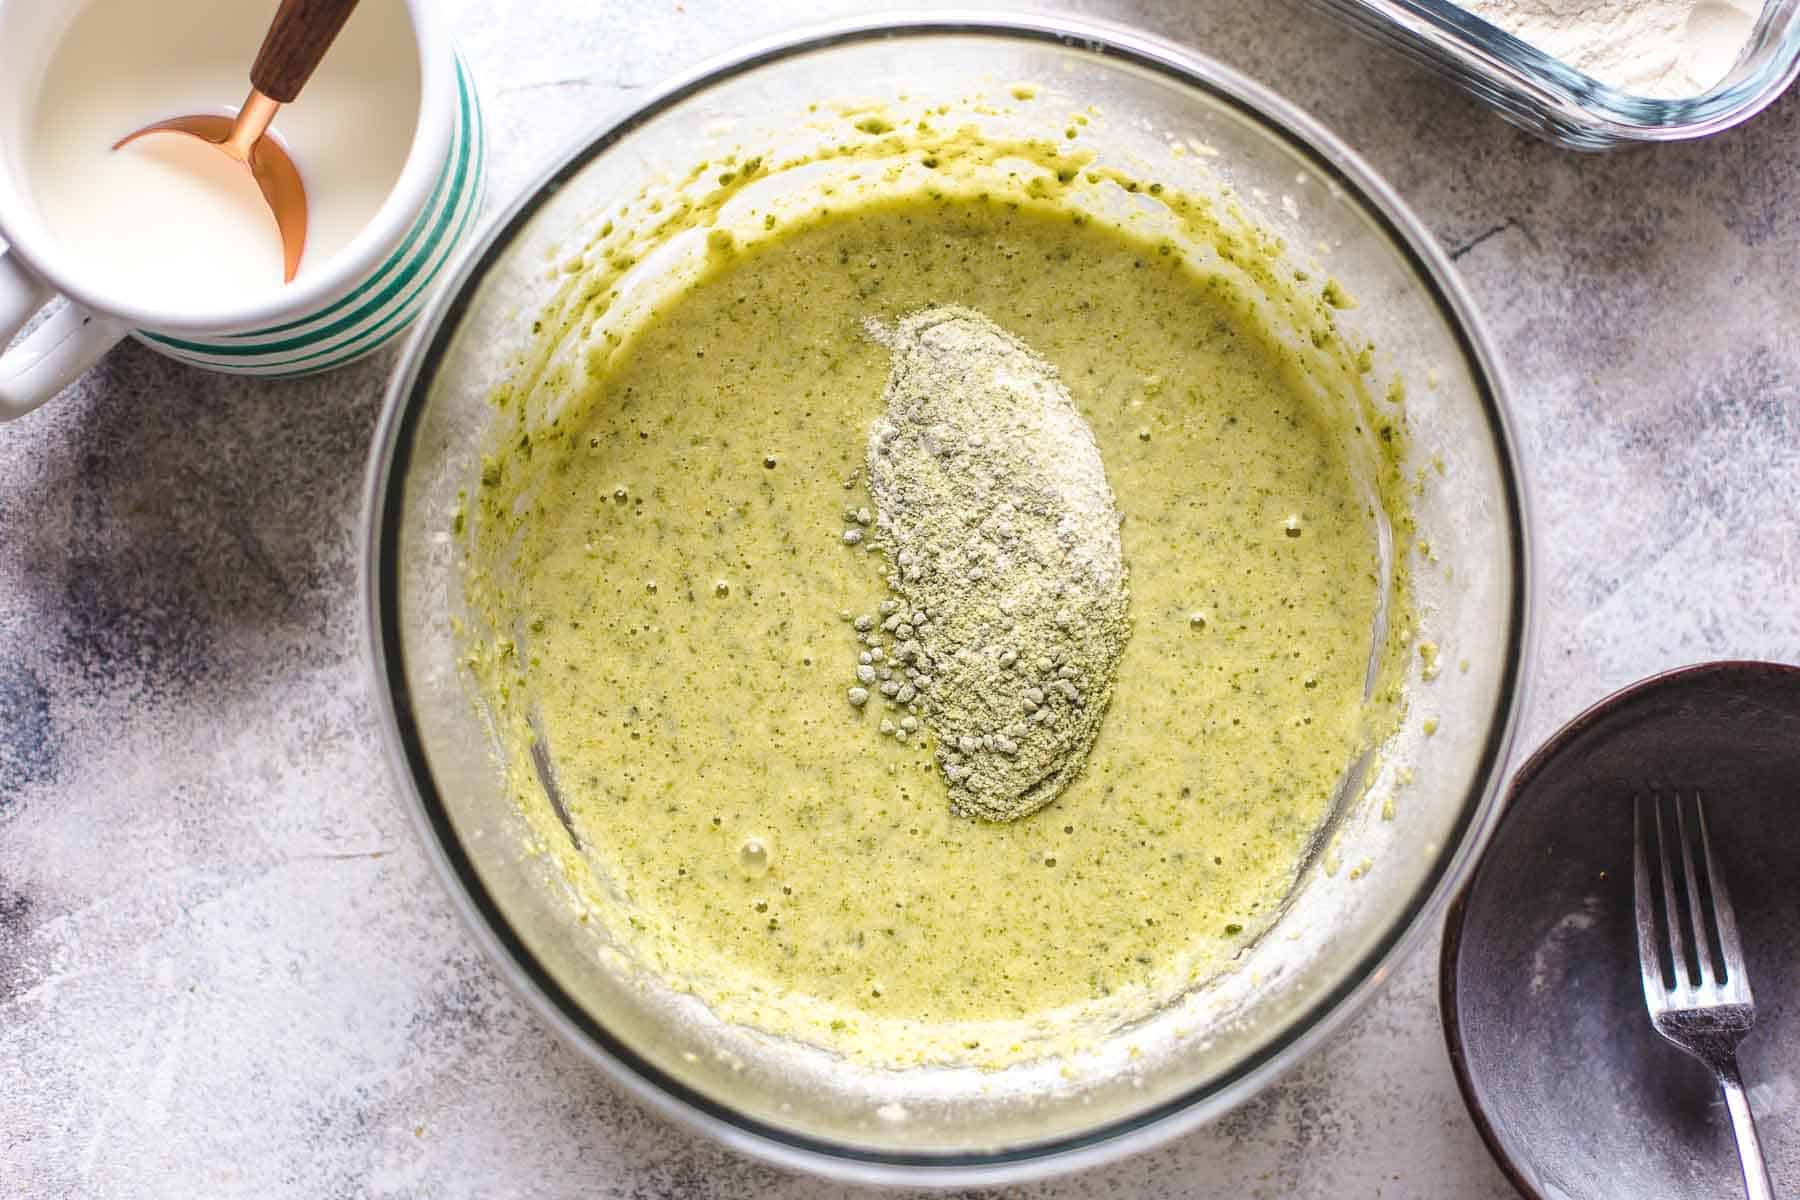 green cake batter with pistachios and dry cake ingredients on top in a bowl